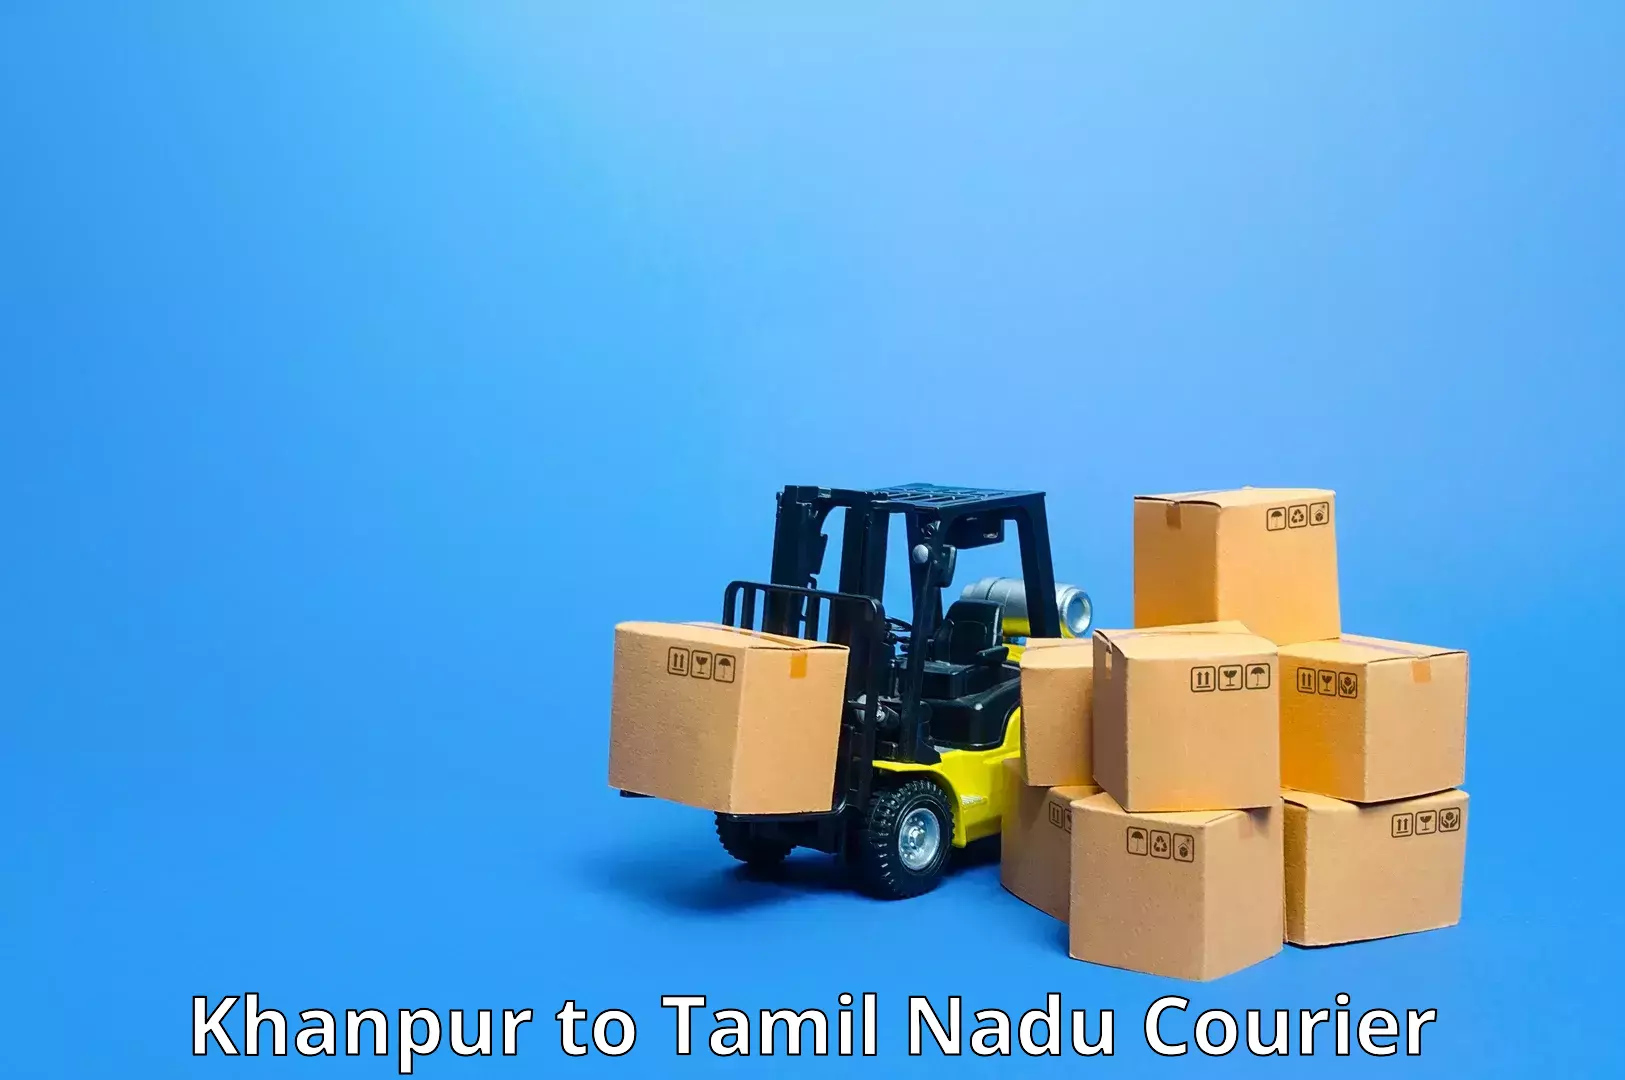 Nationwide courier service Khanpur to Ambur